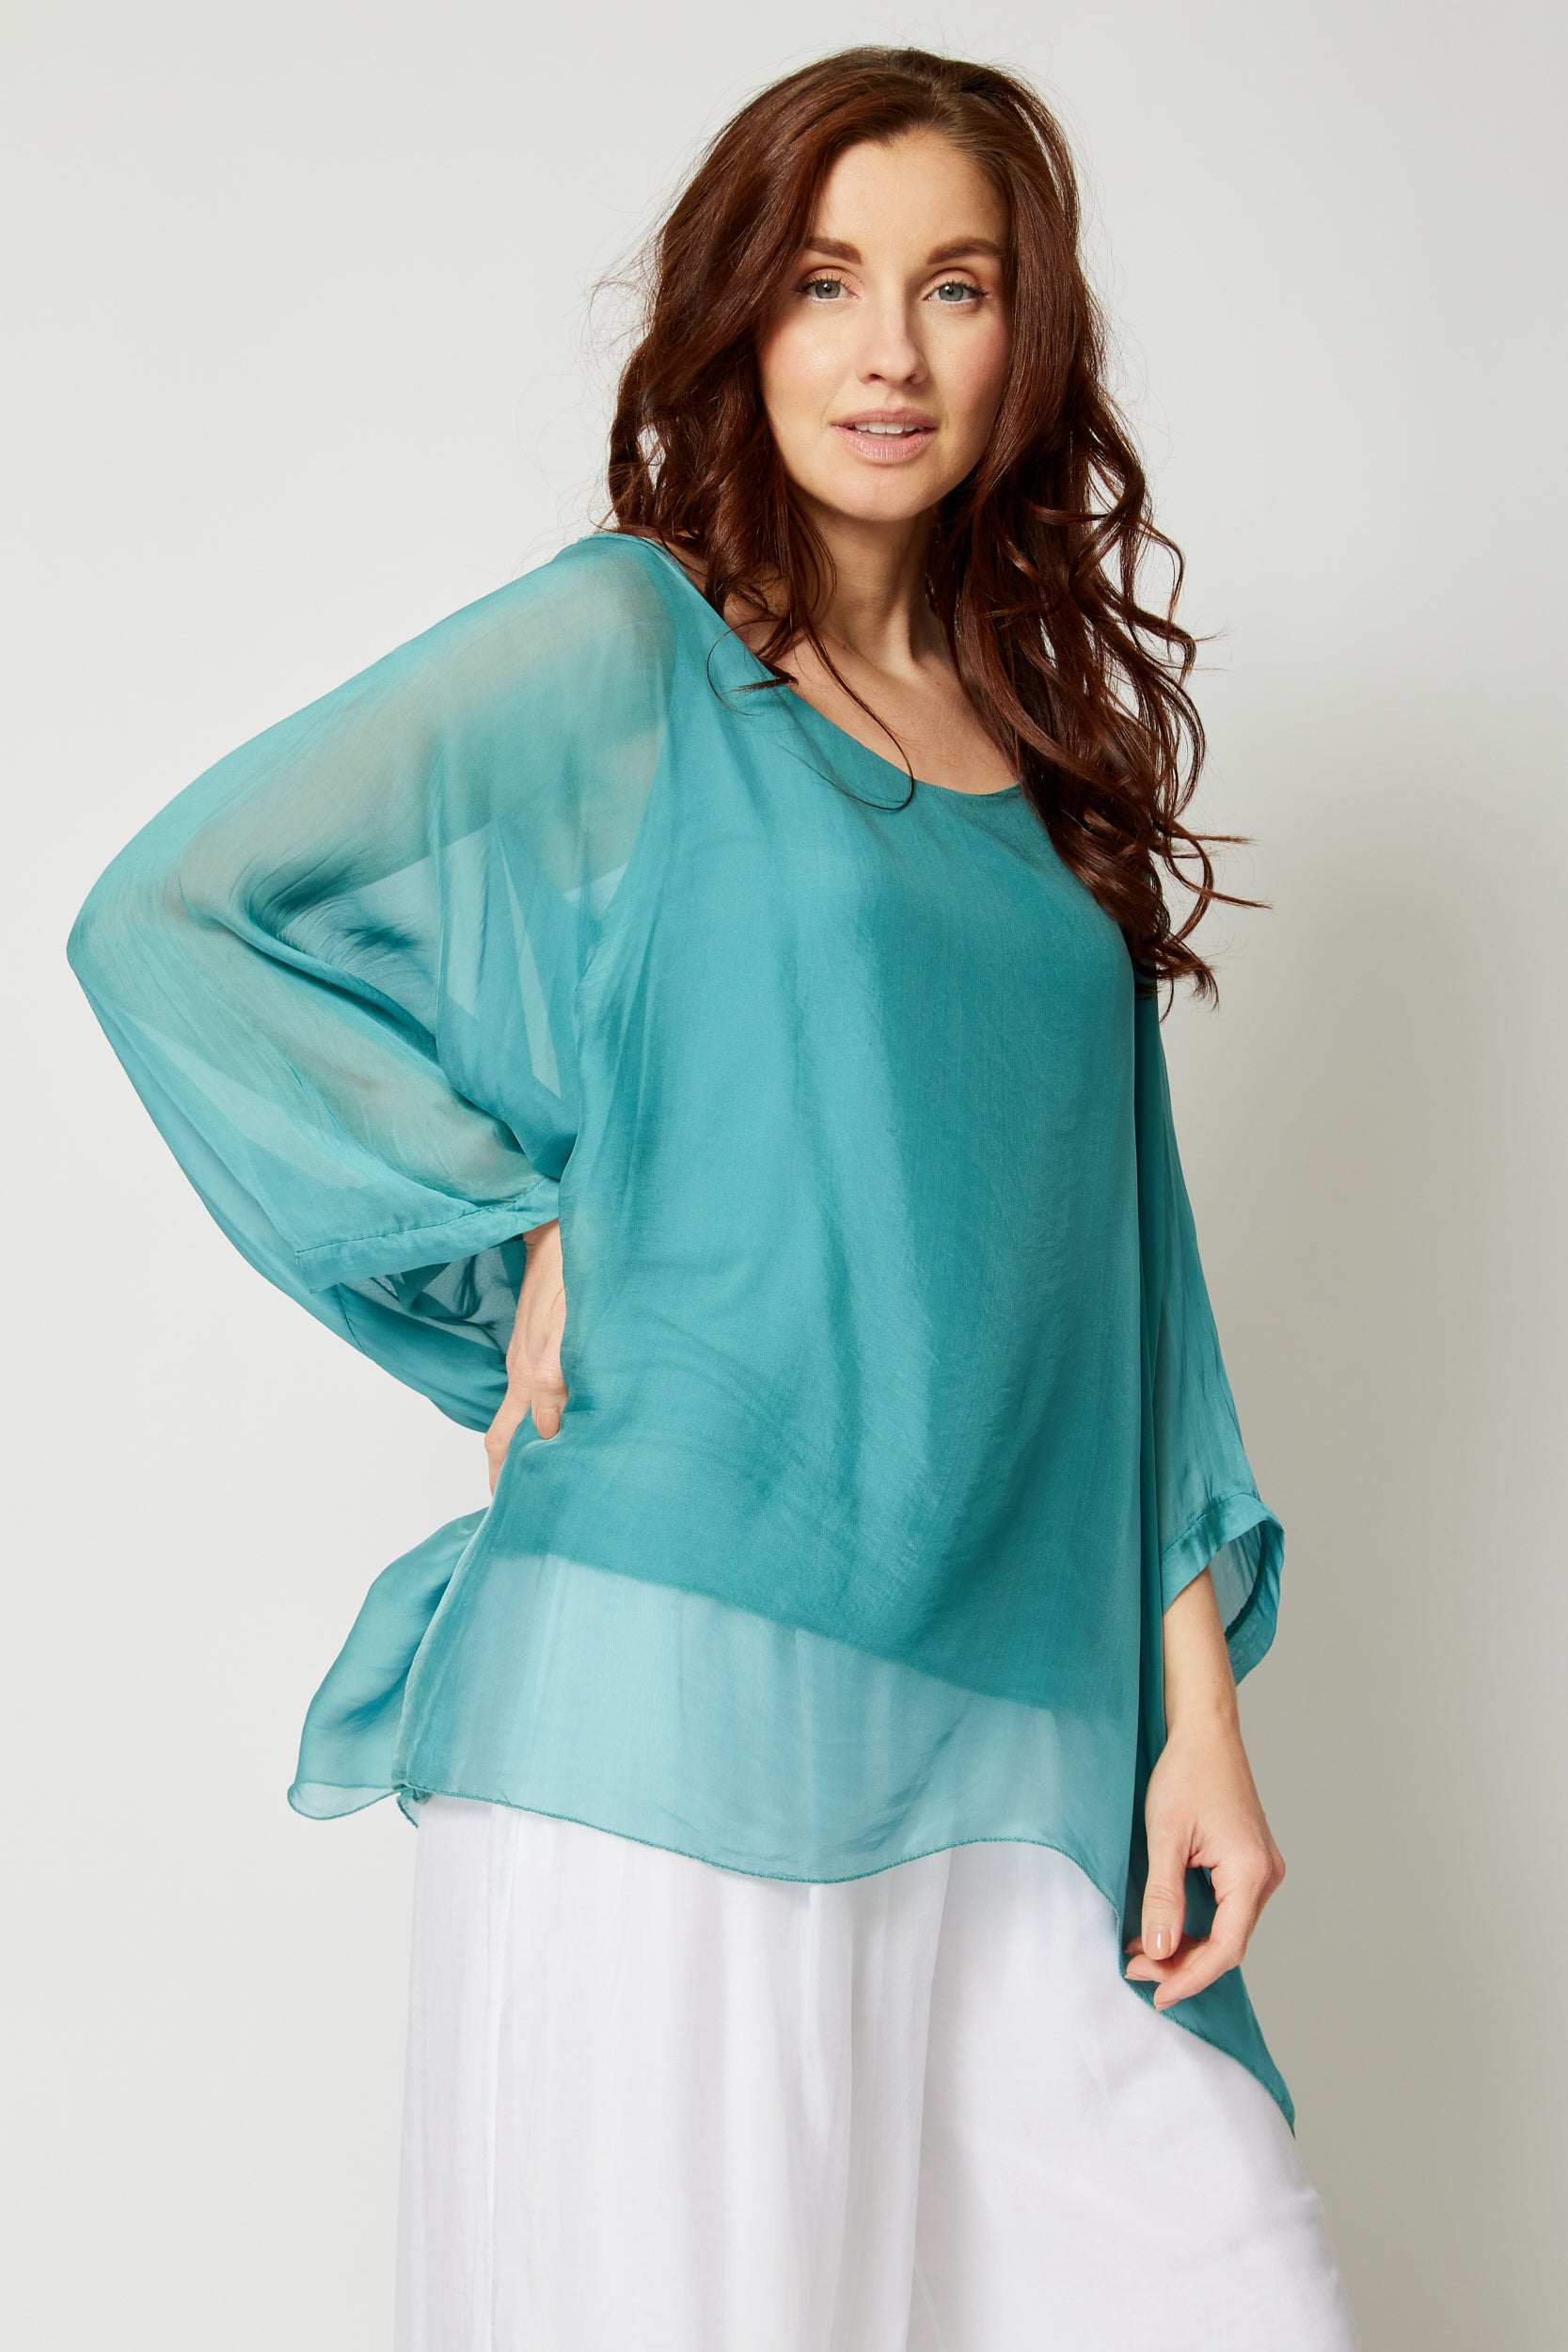 Italian Silk Soft Flowing Top (Two Colors) - Jacqueline B Clothing